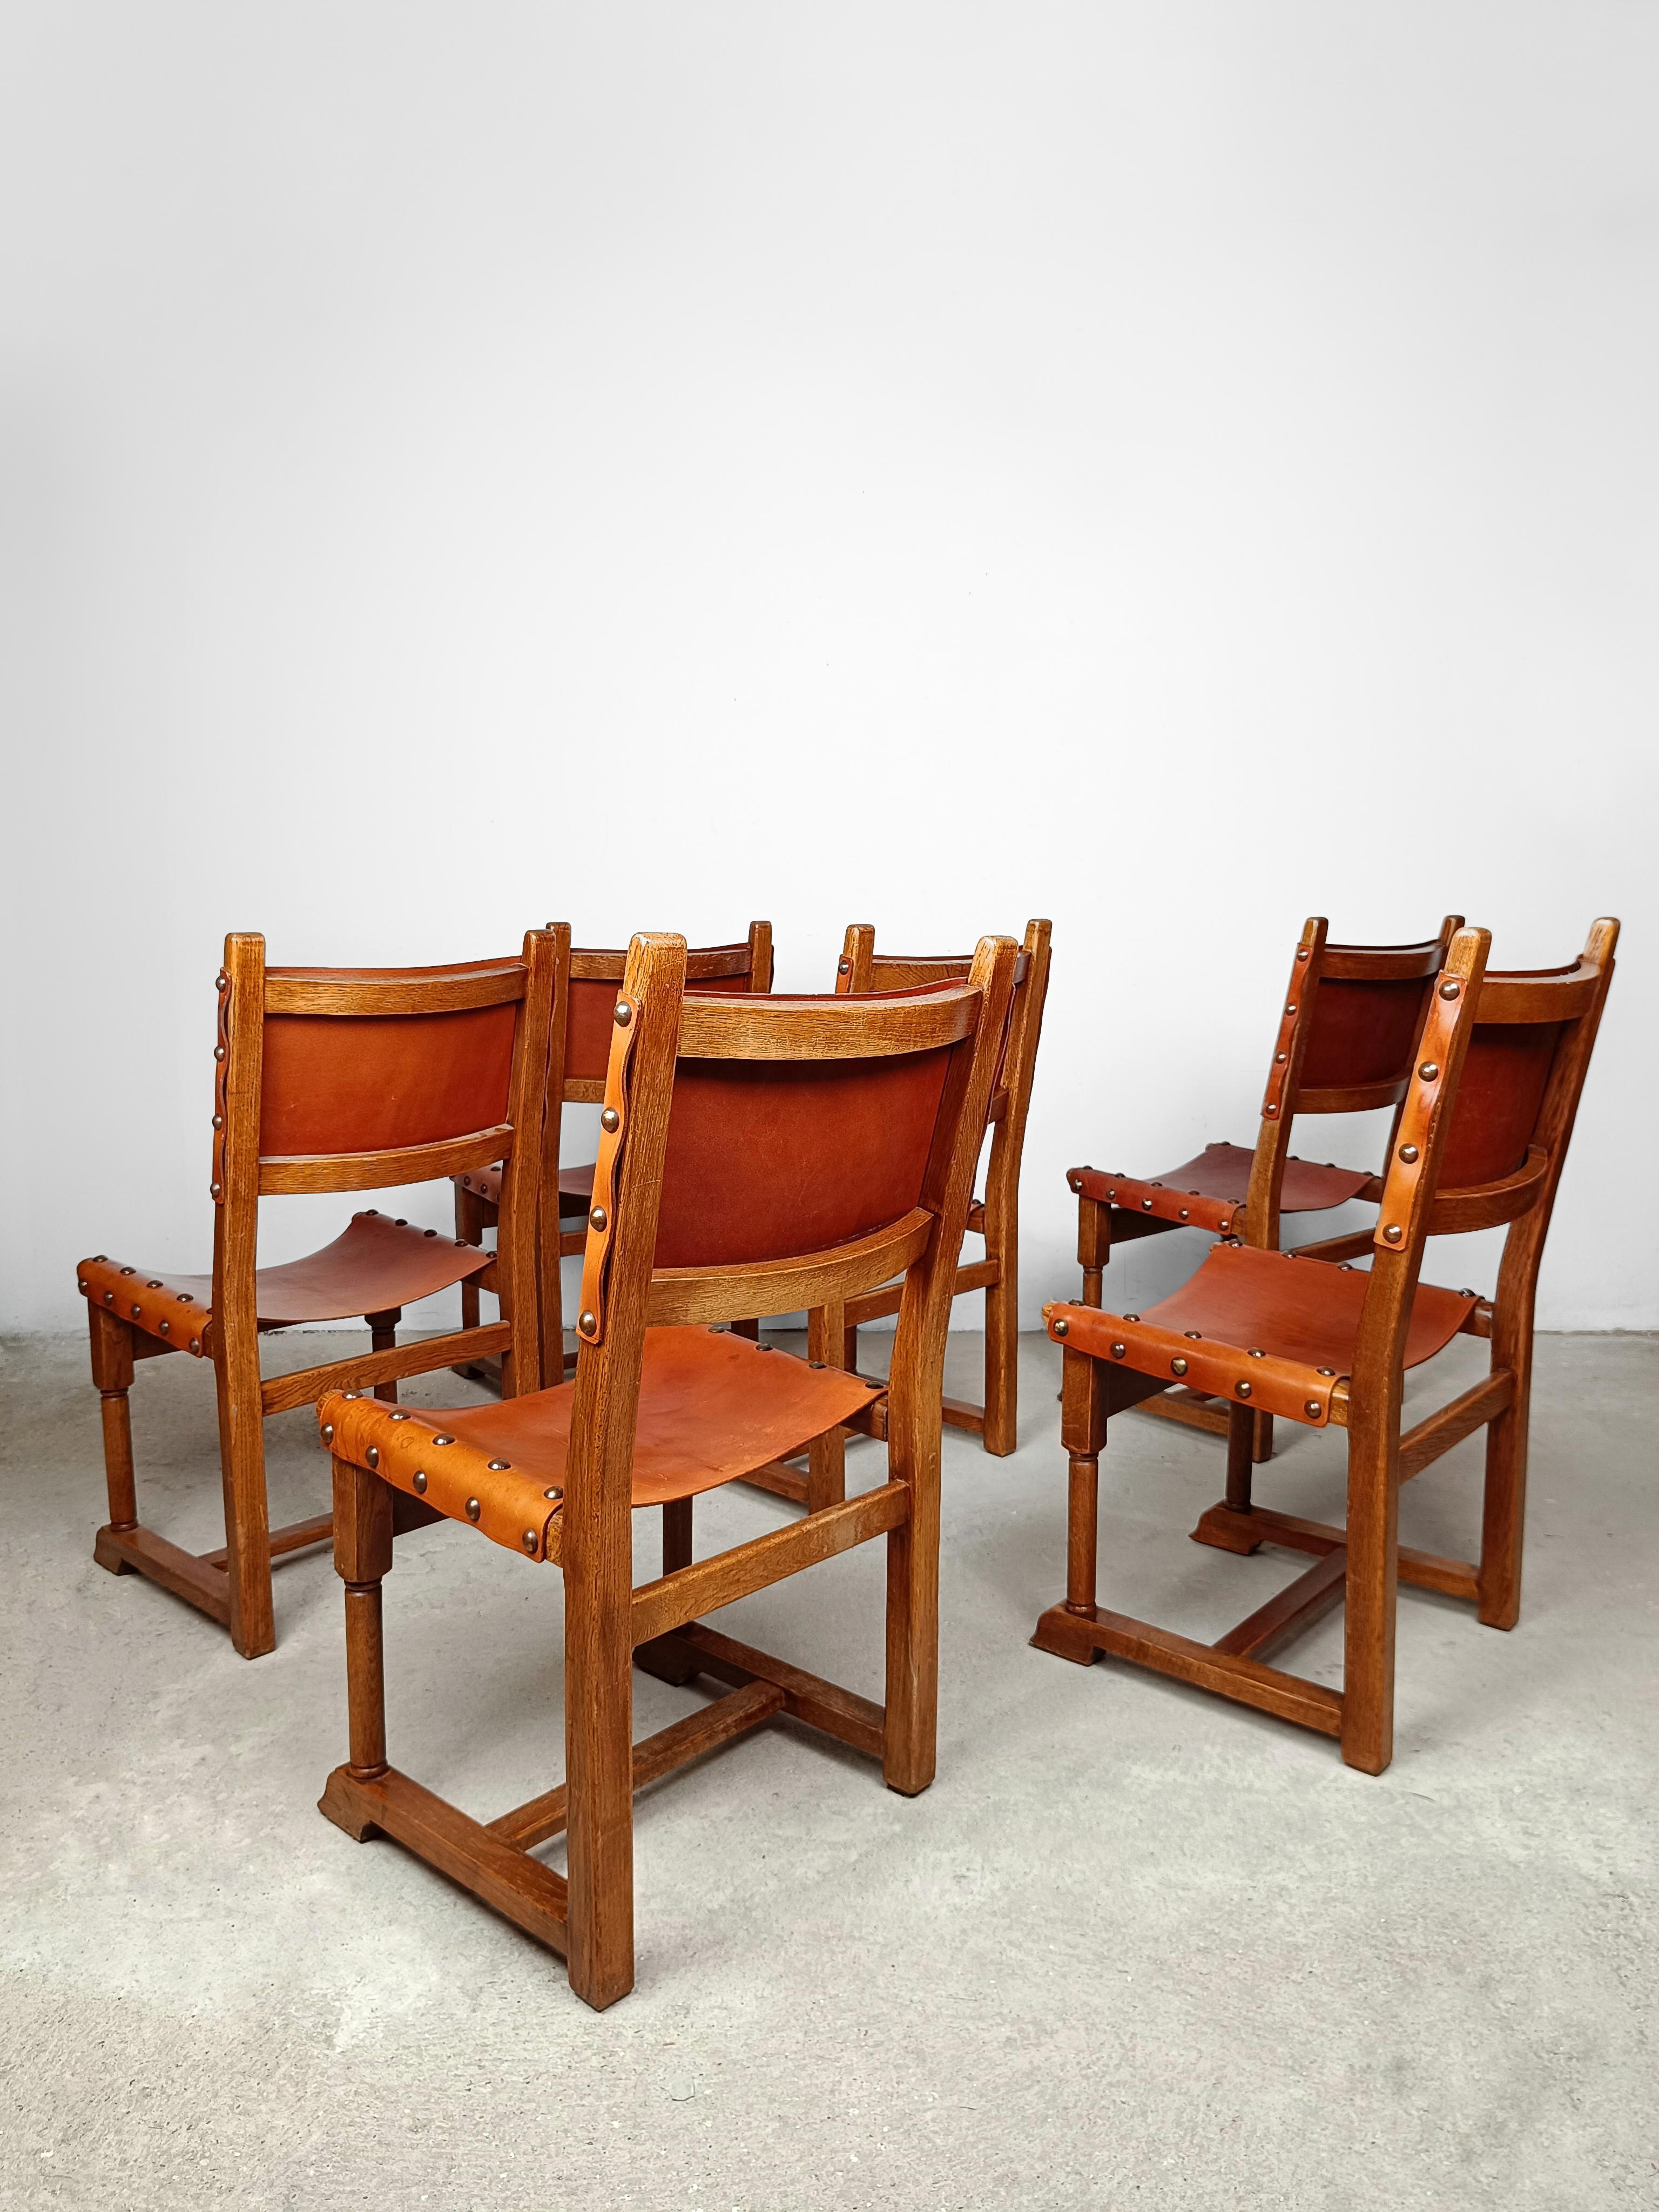 Set of Six Rustic Italian Chairs in Cognac Studded Leather and solid Oak Wood  For Sale 2